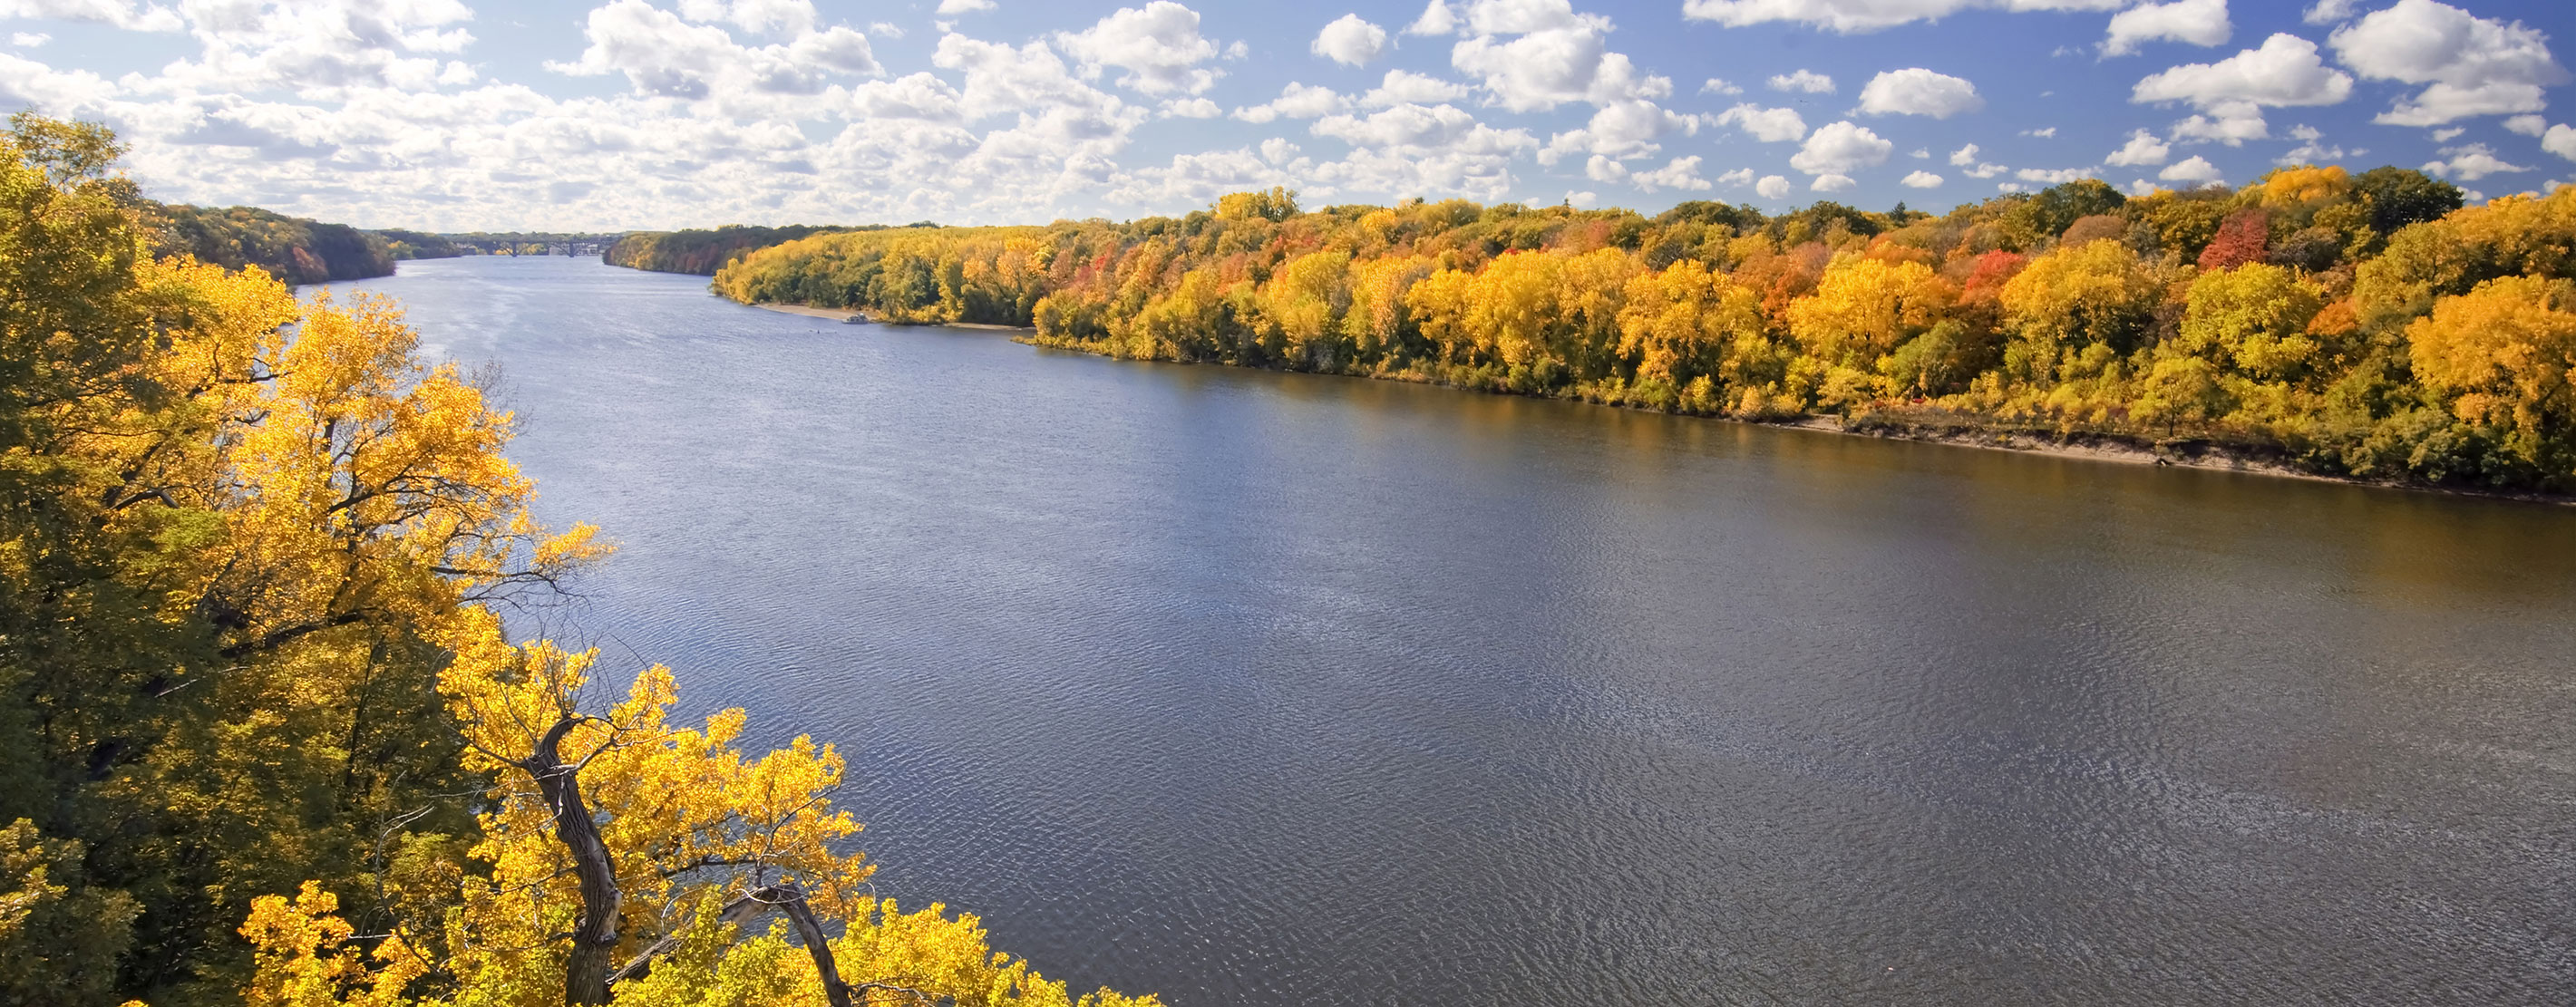 A View Of The Mississippi River In The Fall